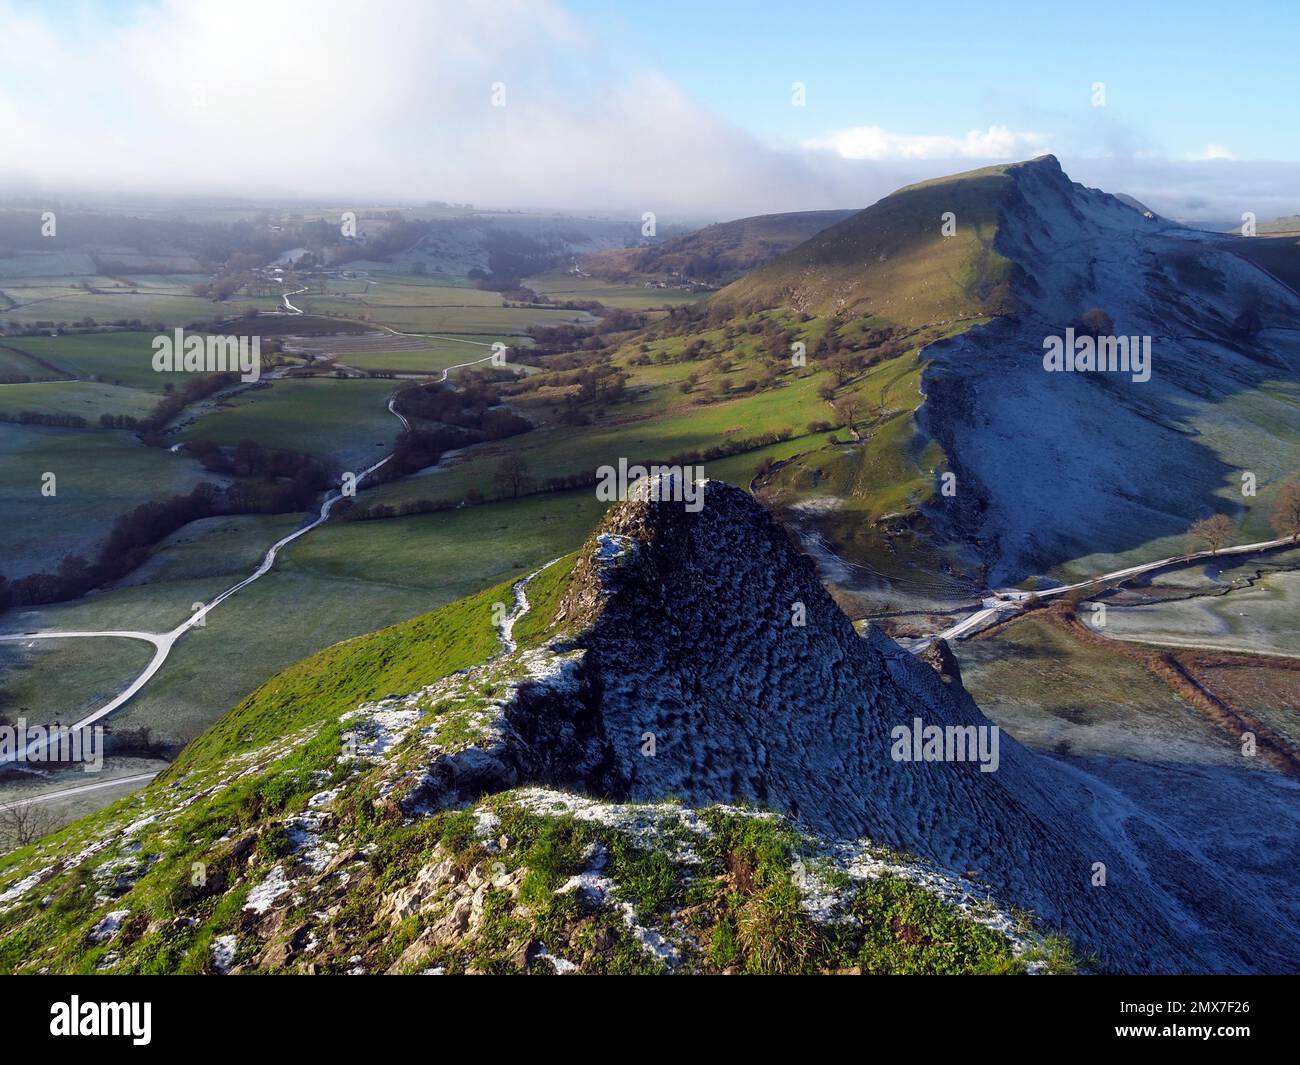 Chrome hill from Parkhouse hill, Peak District, England Stock Photo - Alamy